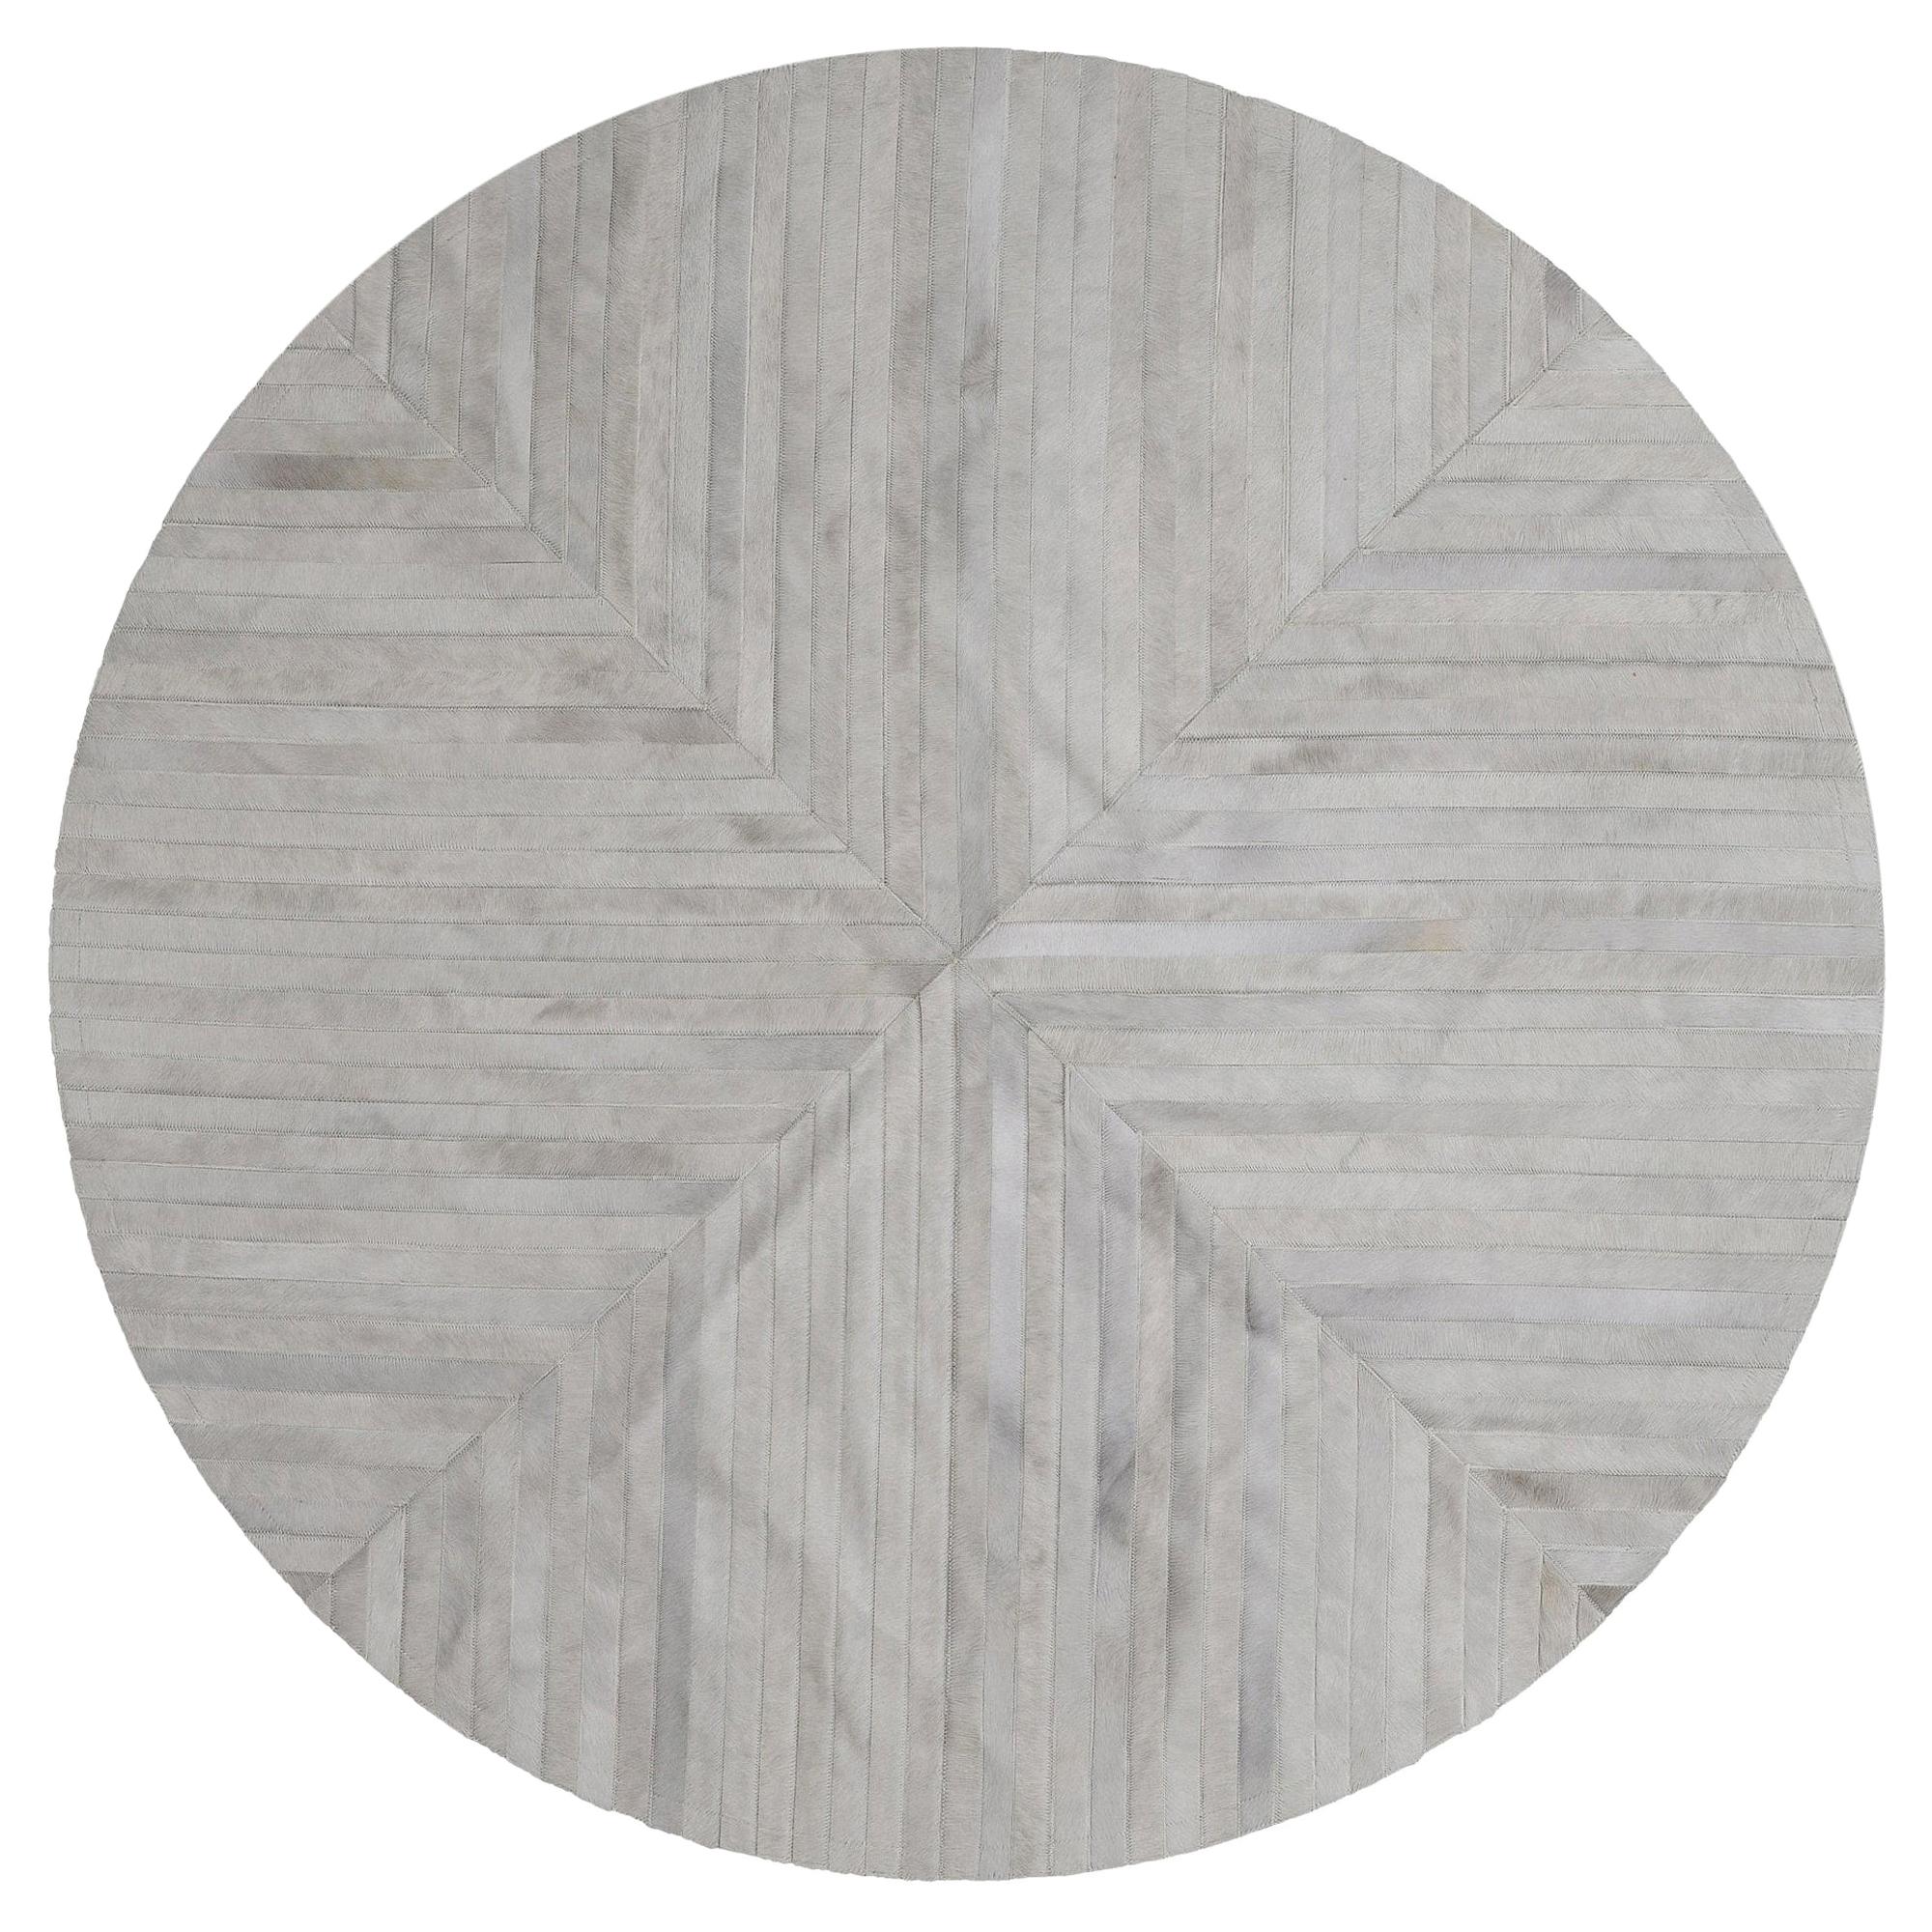 Round, Dyed Gray Customizable La Quinta Cowhide Area Floor Rug X-Large